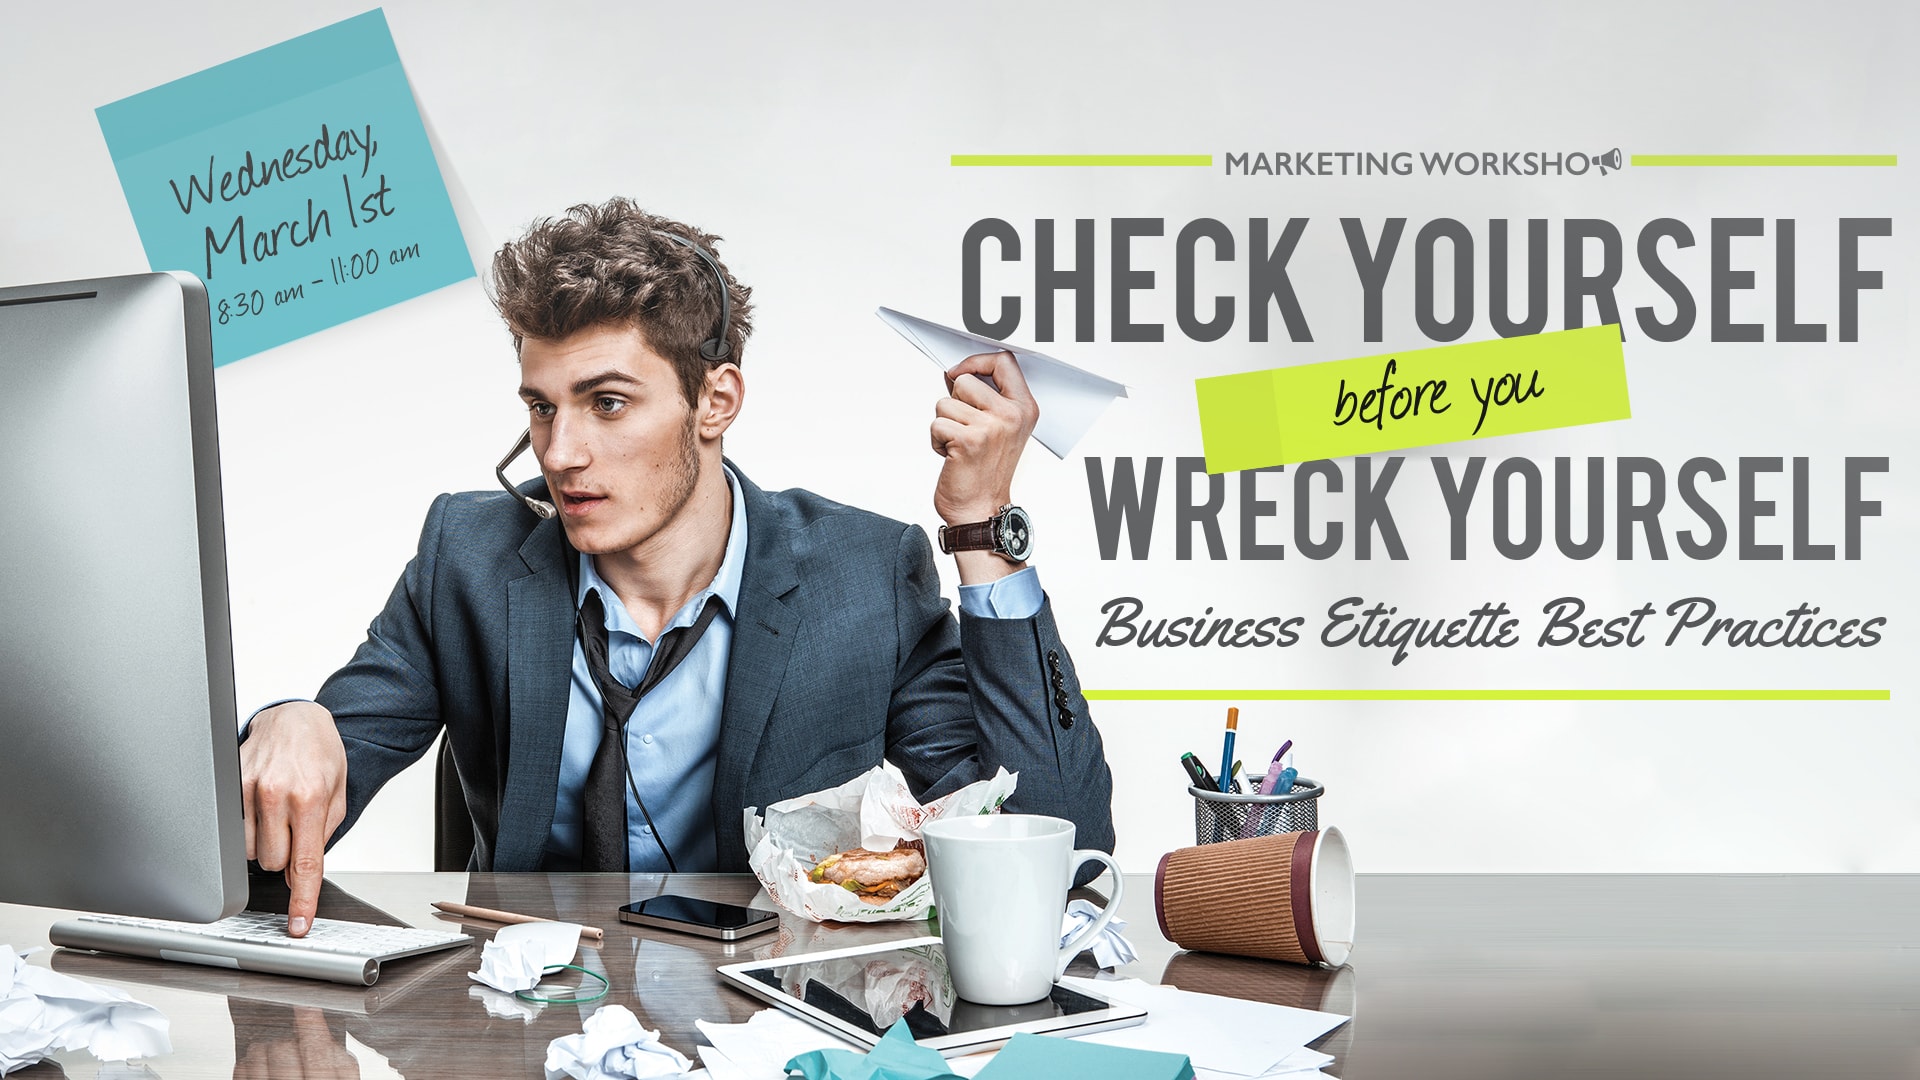 Marketing Workshop: Check Yourself Before you Wreck Yourself